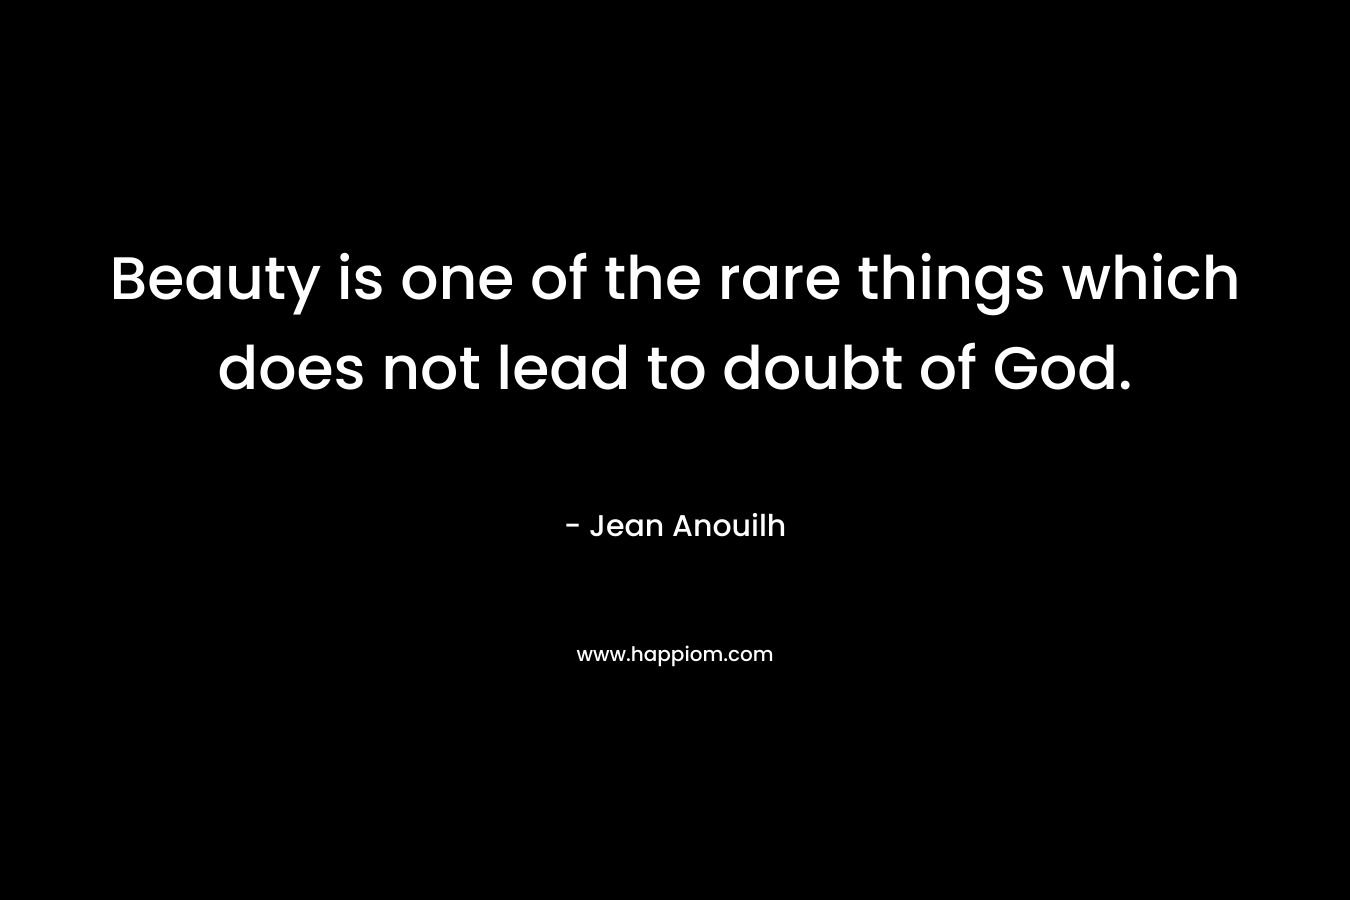 Beauty is one of the rare things which does not lead to doubt of God.